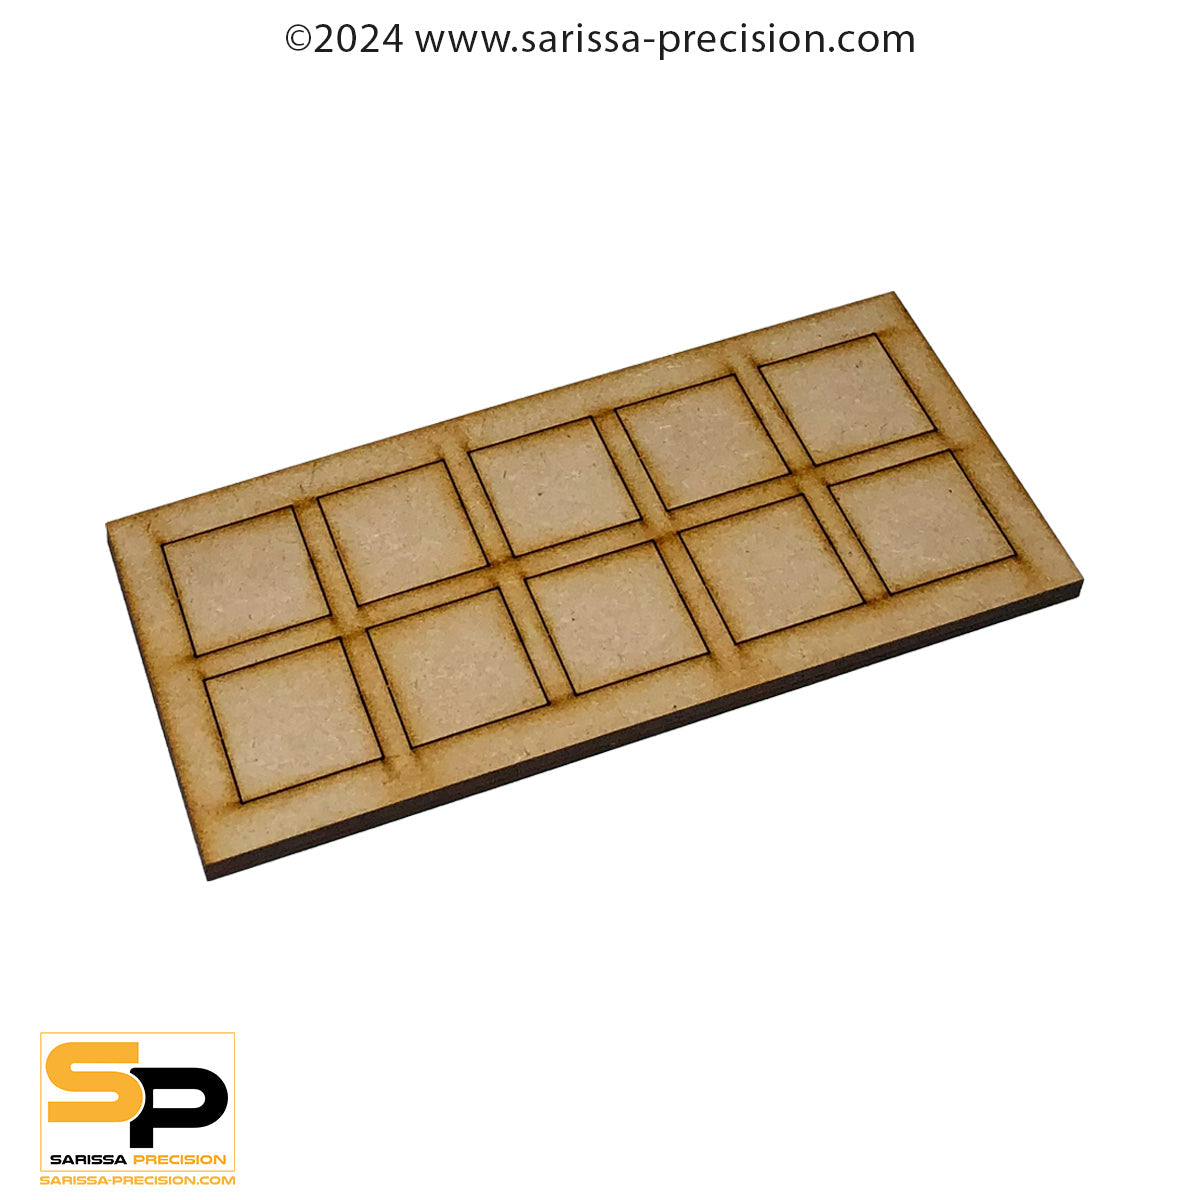 5x3 30x30mm Conversion Tray for 25x25mm bases